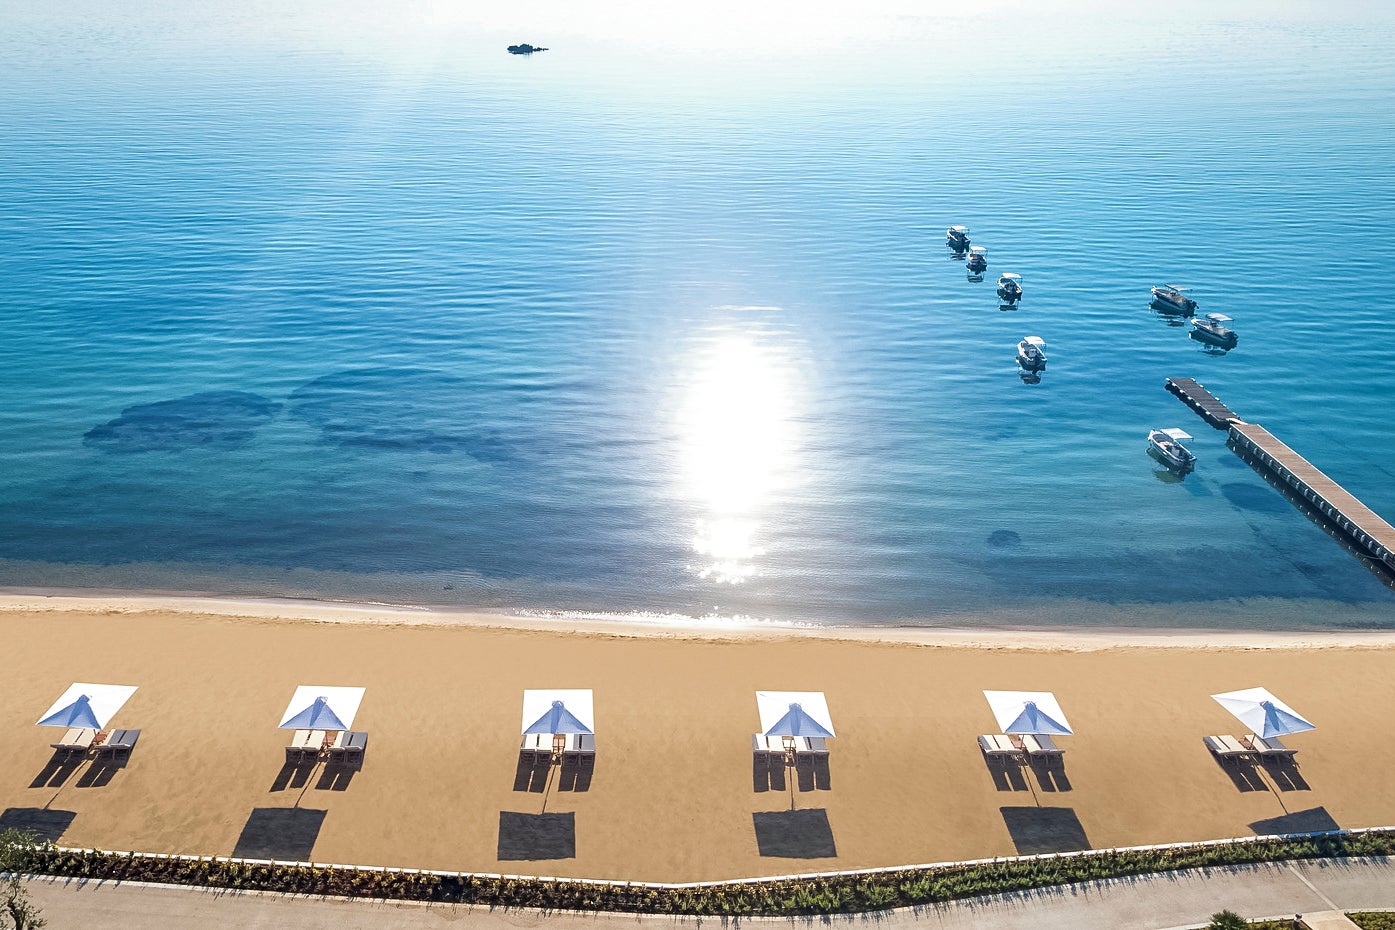 Discover beach perfection around Greece’s incredible coastline, such as the spectacular Ikos Dassia resort in Corfu